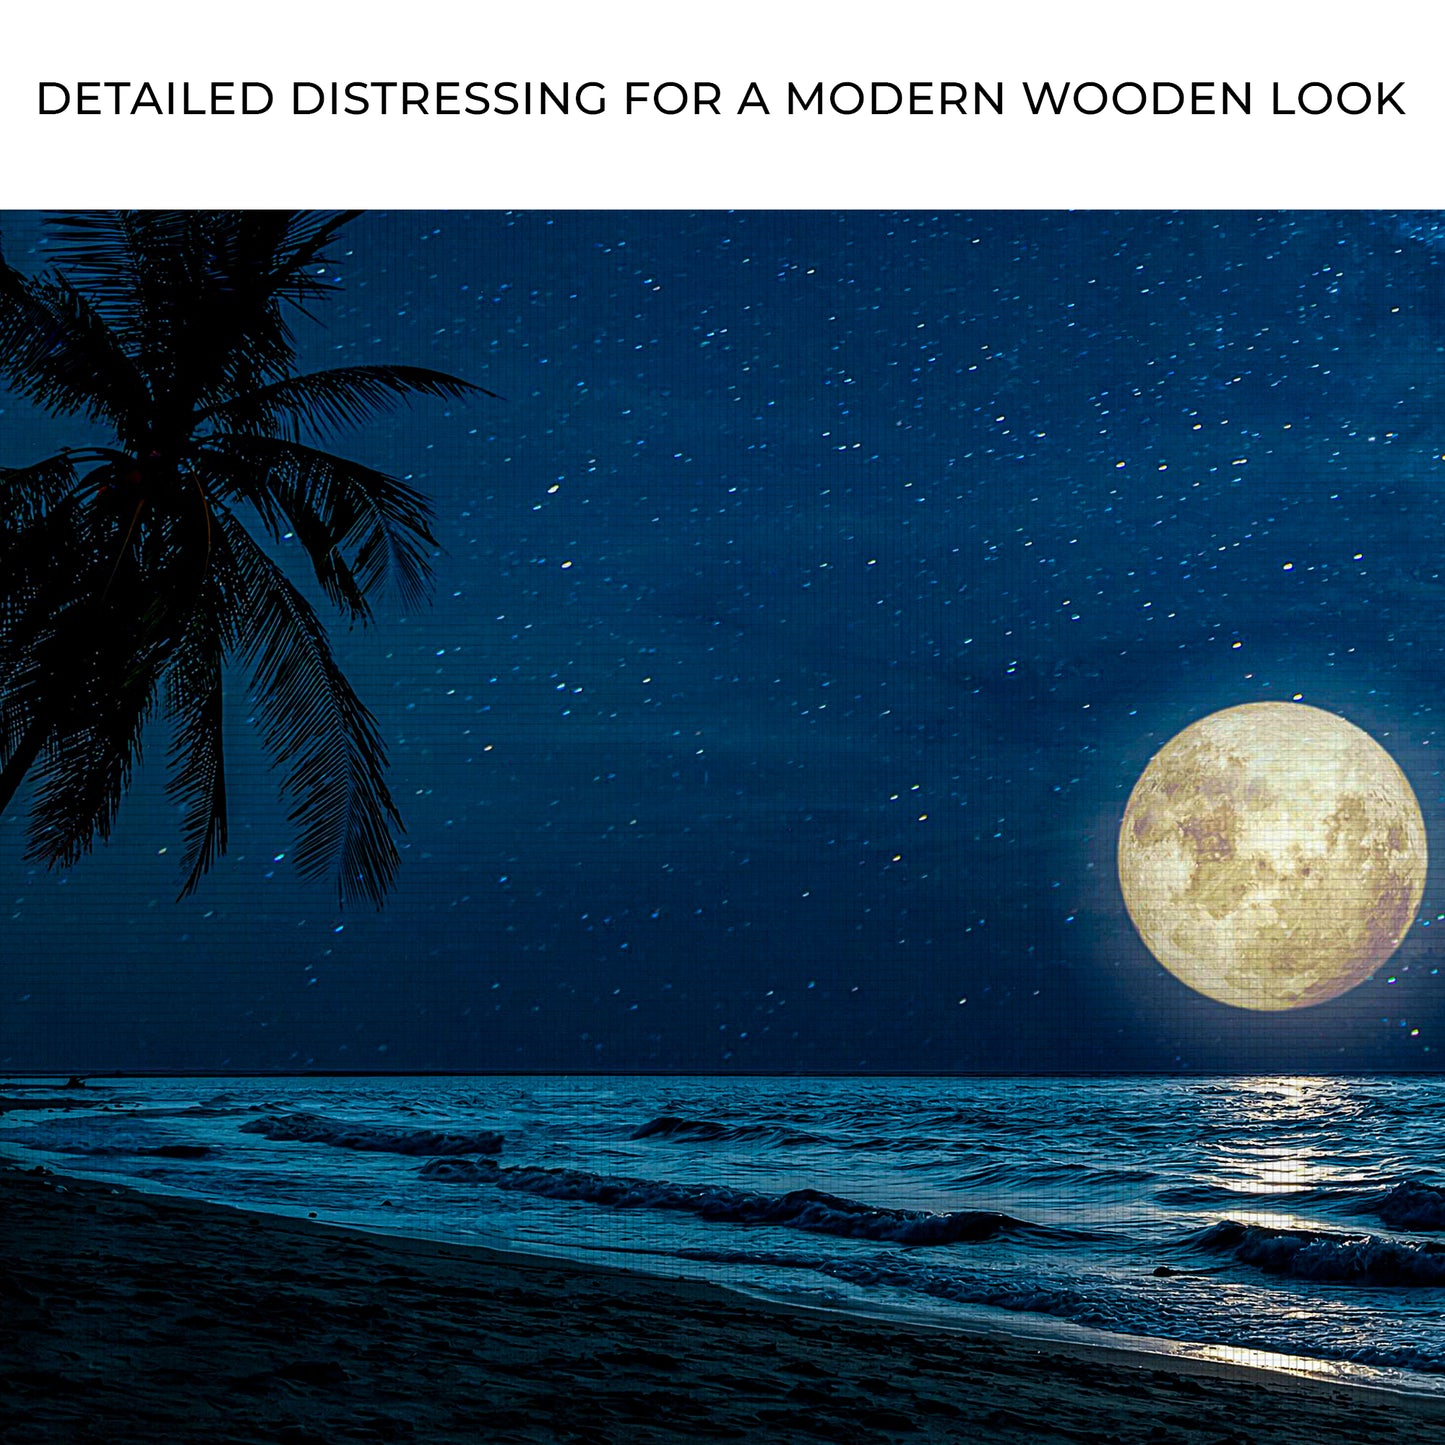 Moonlight Shines At The Beach Canvas Wall Art Zoom - Image by Tailored Canvases